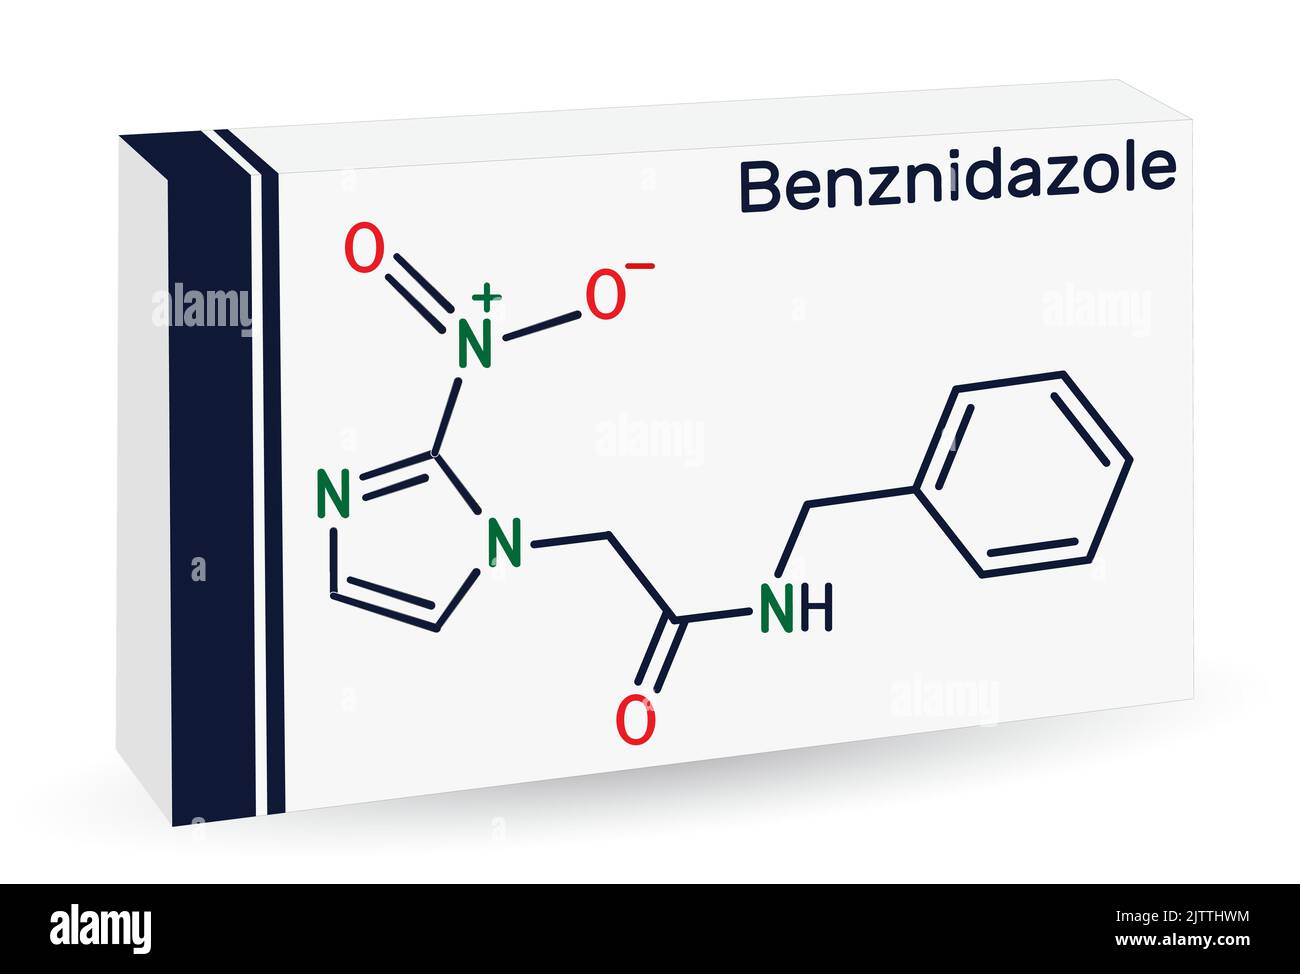 Benznidazole molecule. It is antiparasitic drug used in the treatment of Chagas disease. Skeletal chemical formula. Paper packaging for drugs. Vector Stock Vector